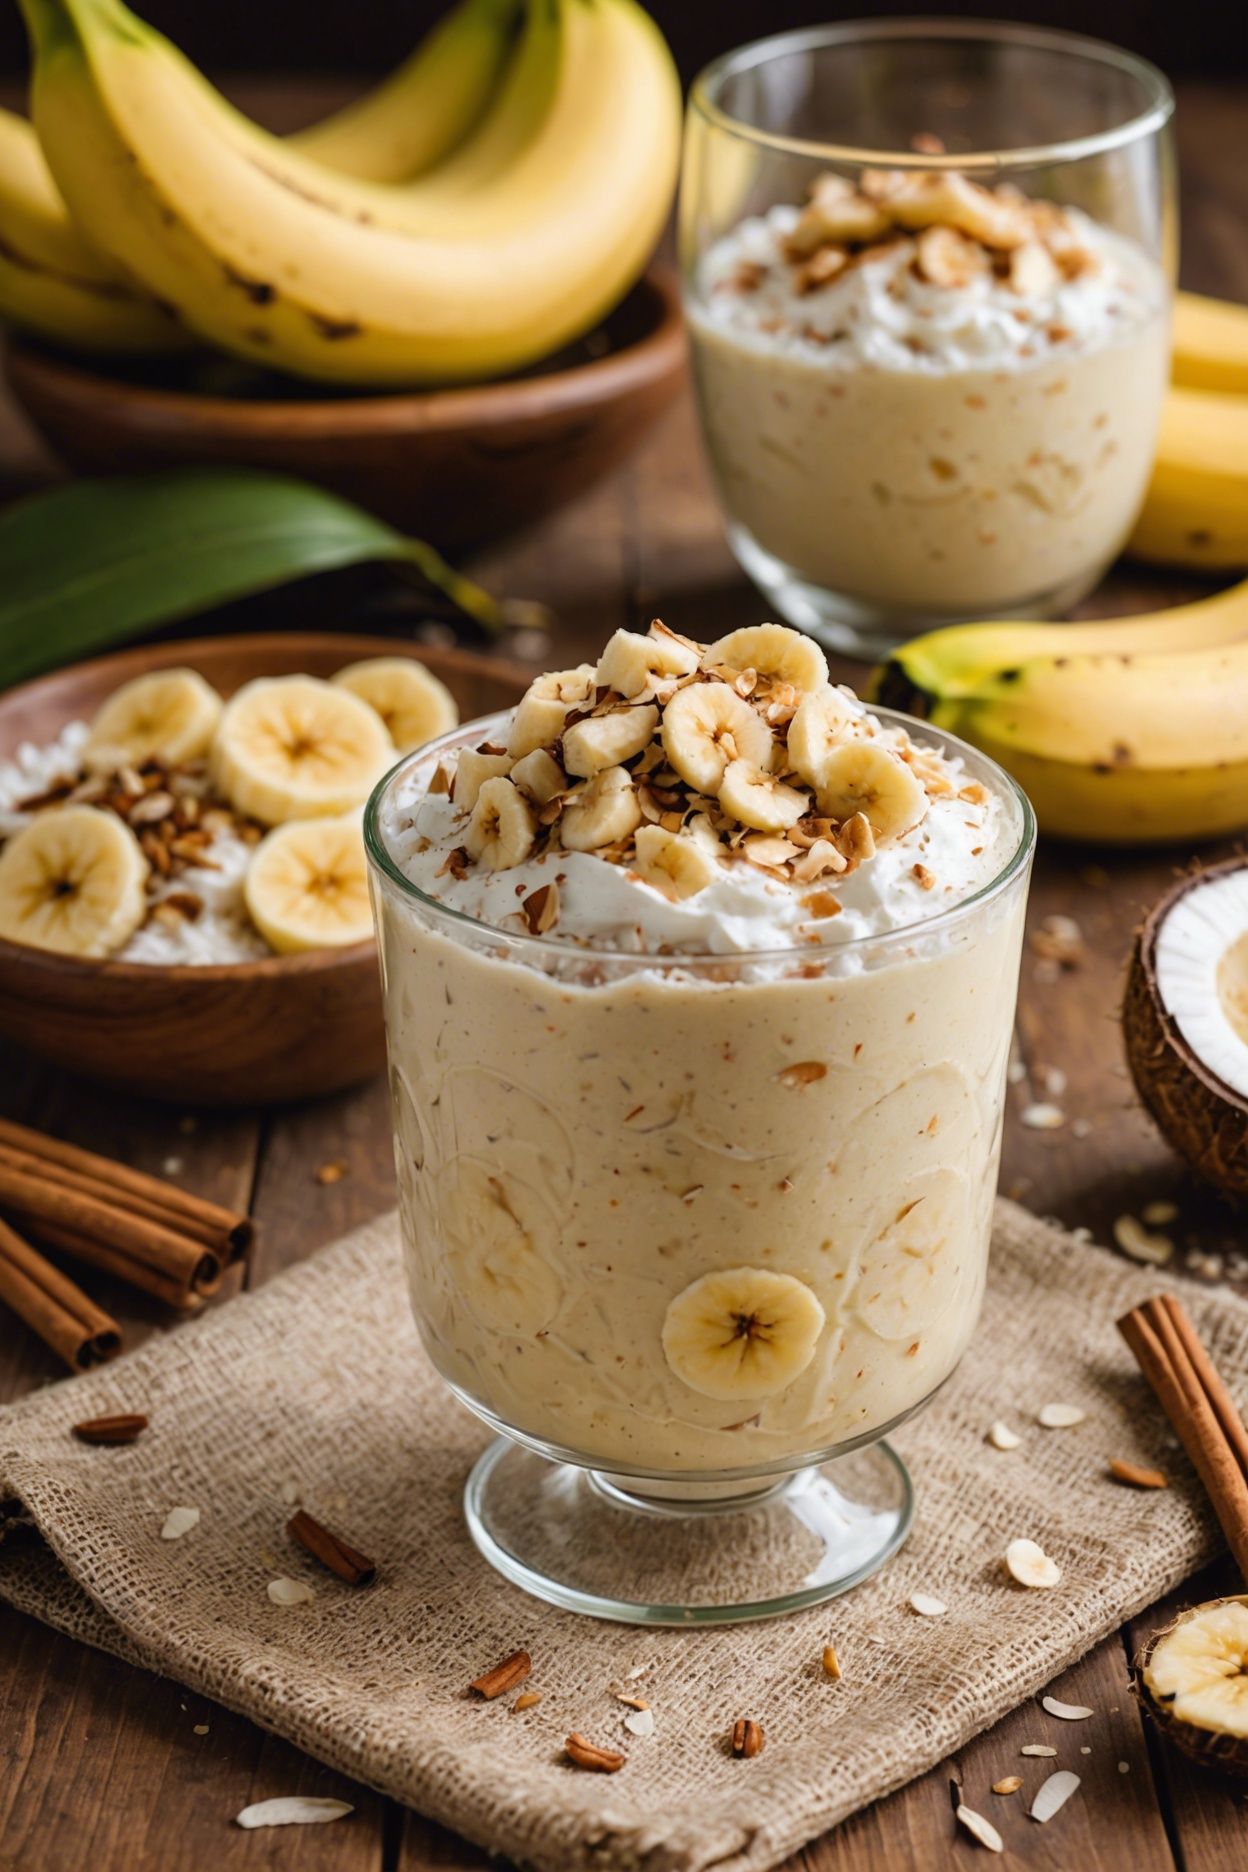 Banana Coconut Pudding Or Pie Filling